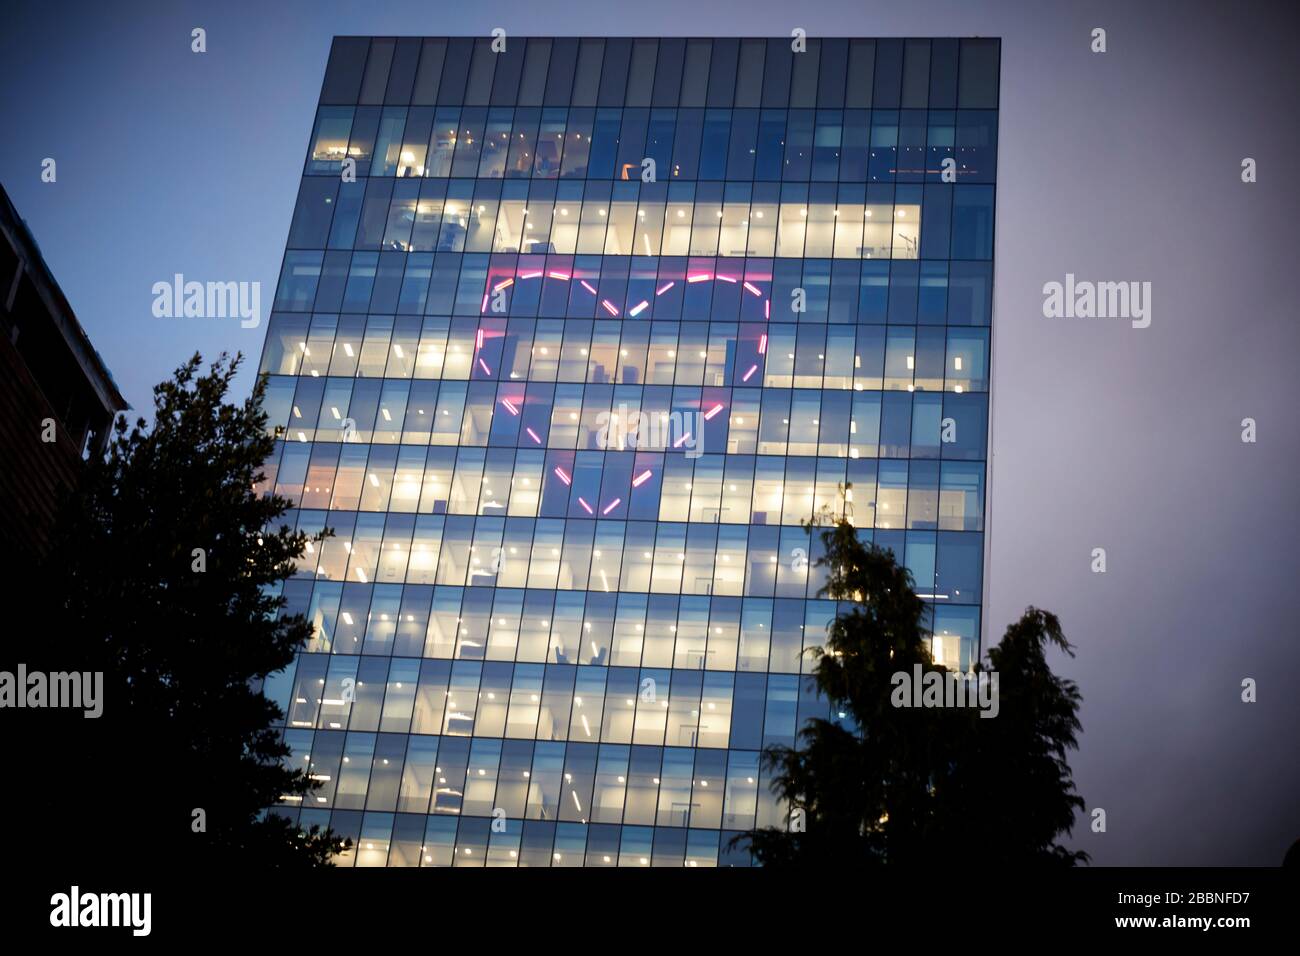 No. 1 Spinningfields,  Manchester's  with neon love heart  window display for valentines day 'With Love' installation Stock Photo